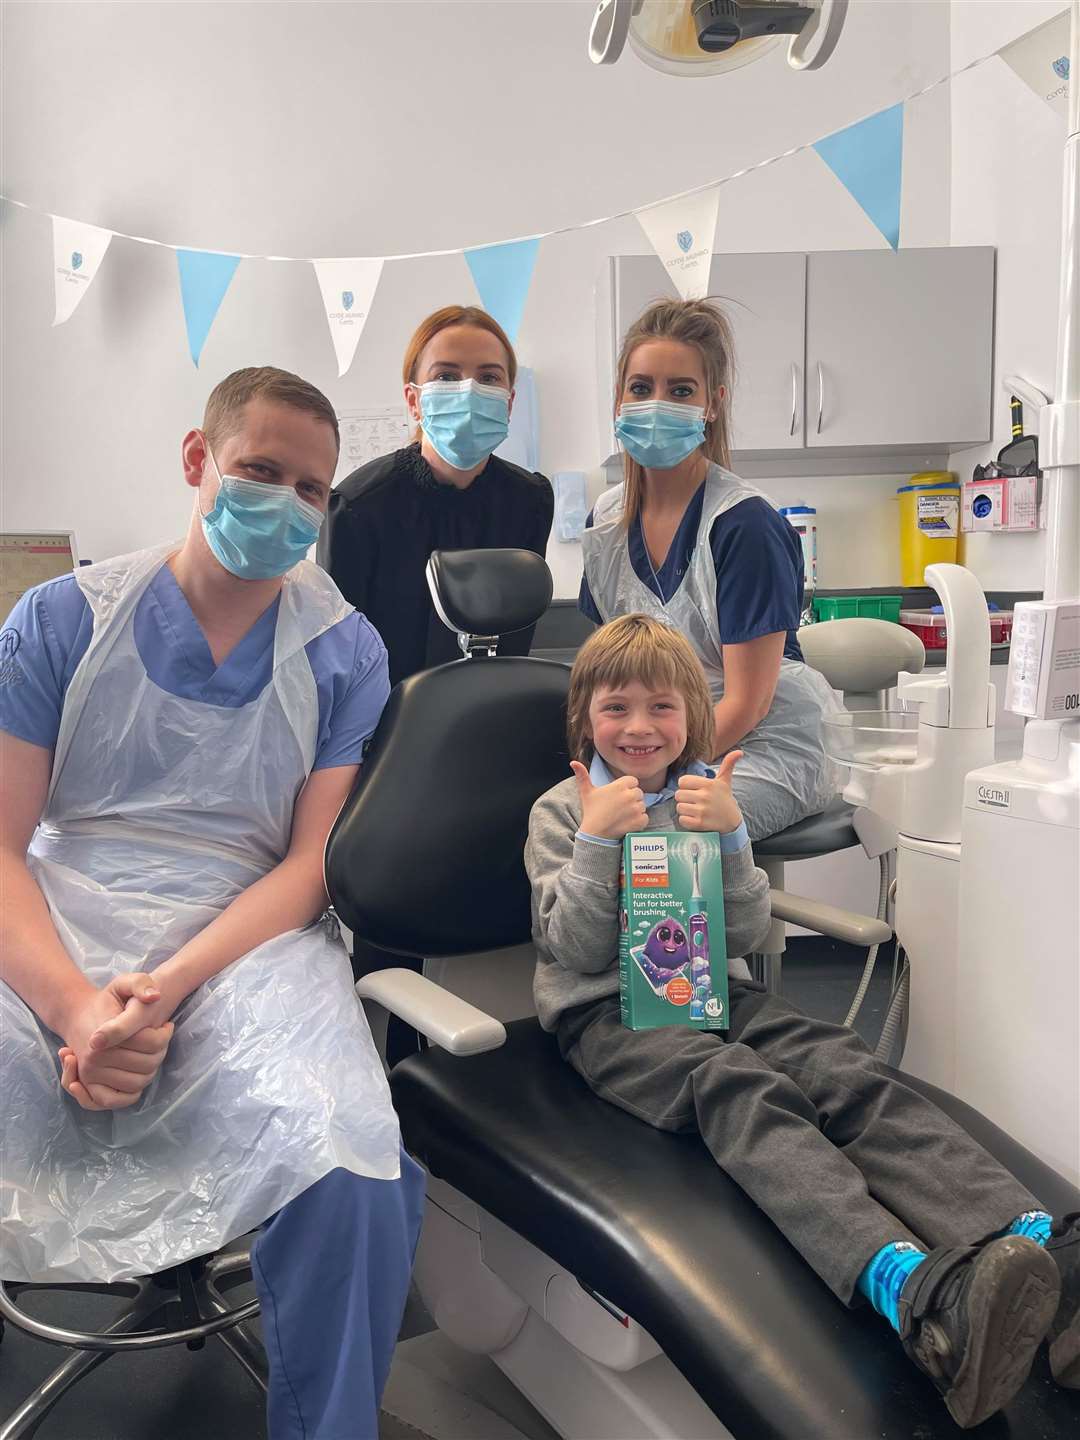 Dental team from left to right, James Dunaway, dentist, Courtney Forrester, practice manager, Louise Thomson, nurse, and Gabriel Schoenhofen, patient.